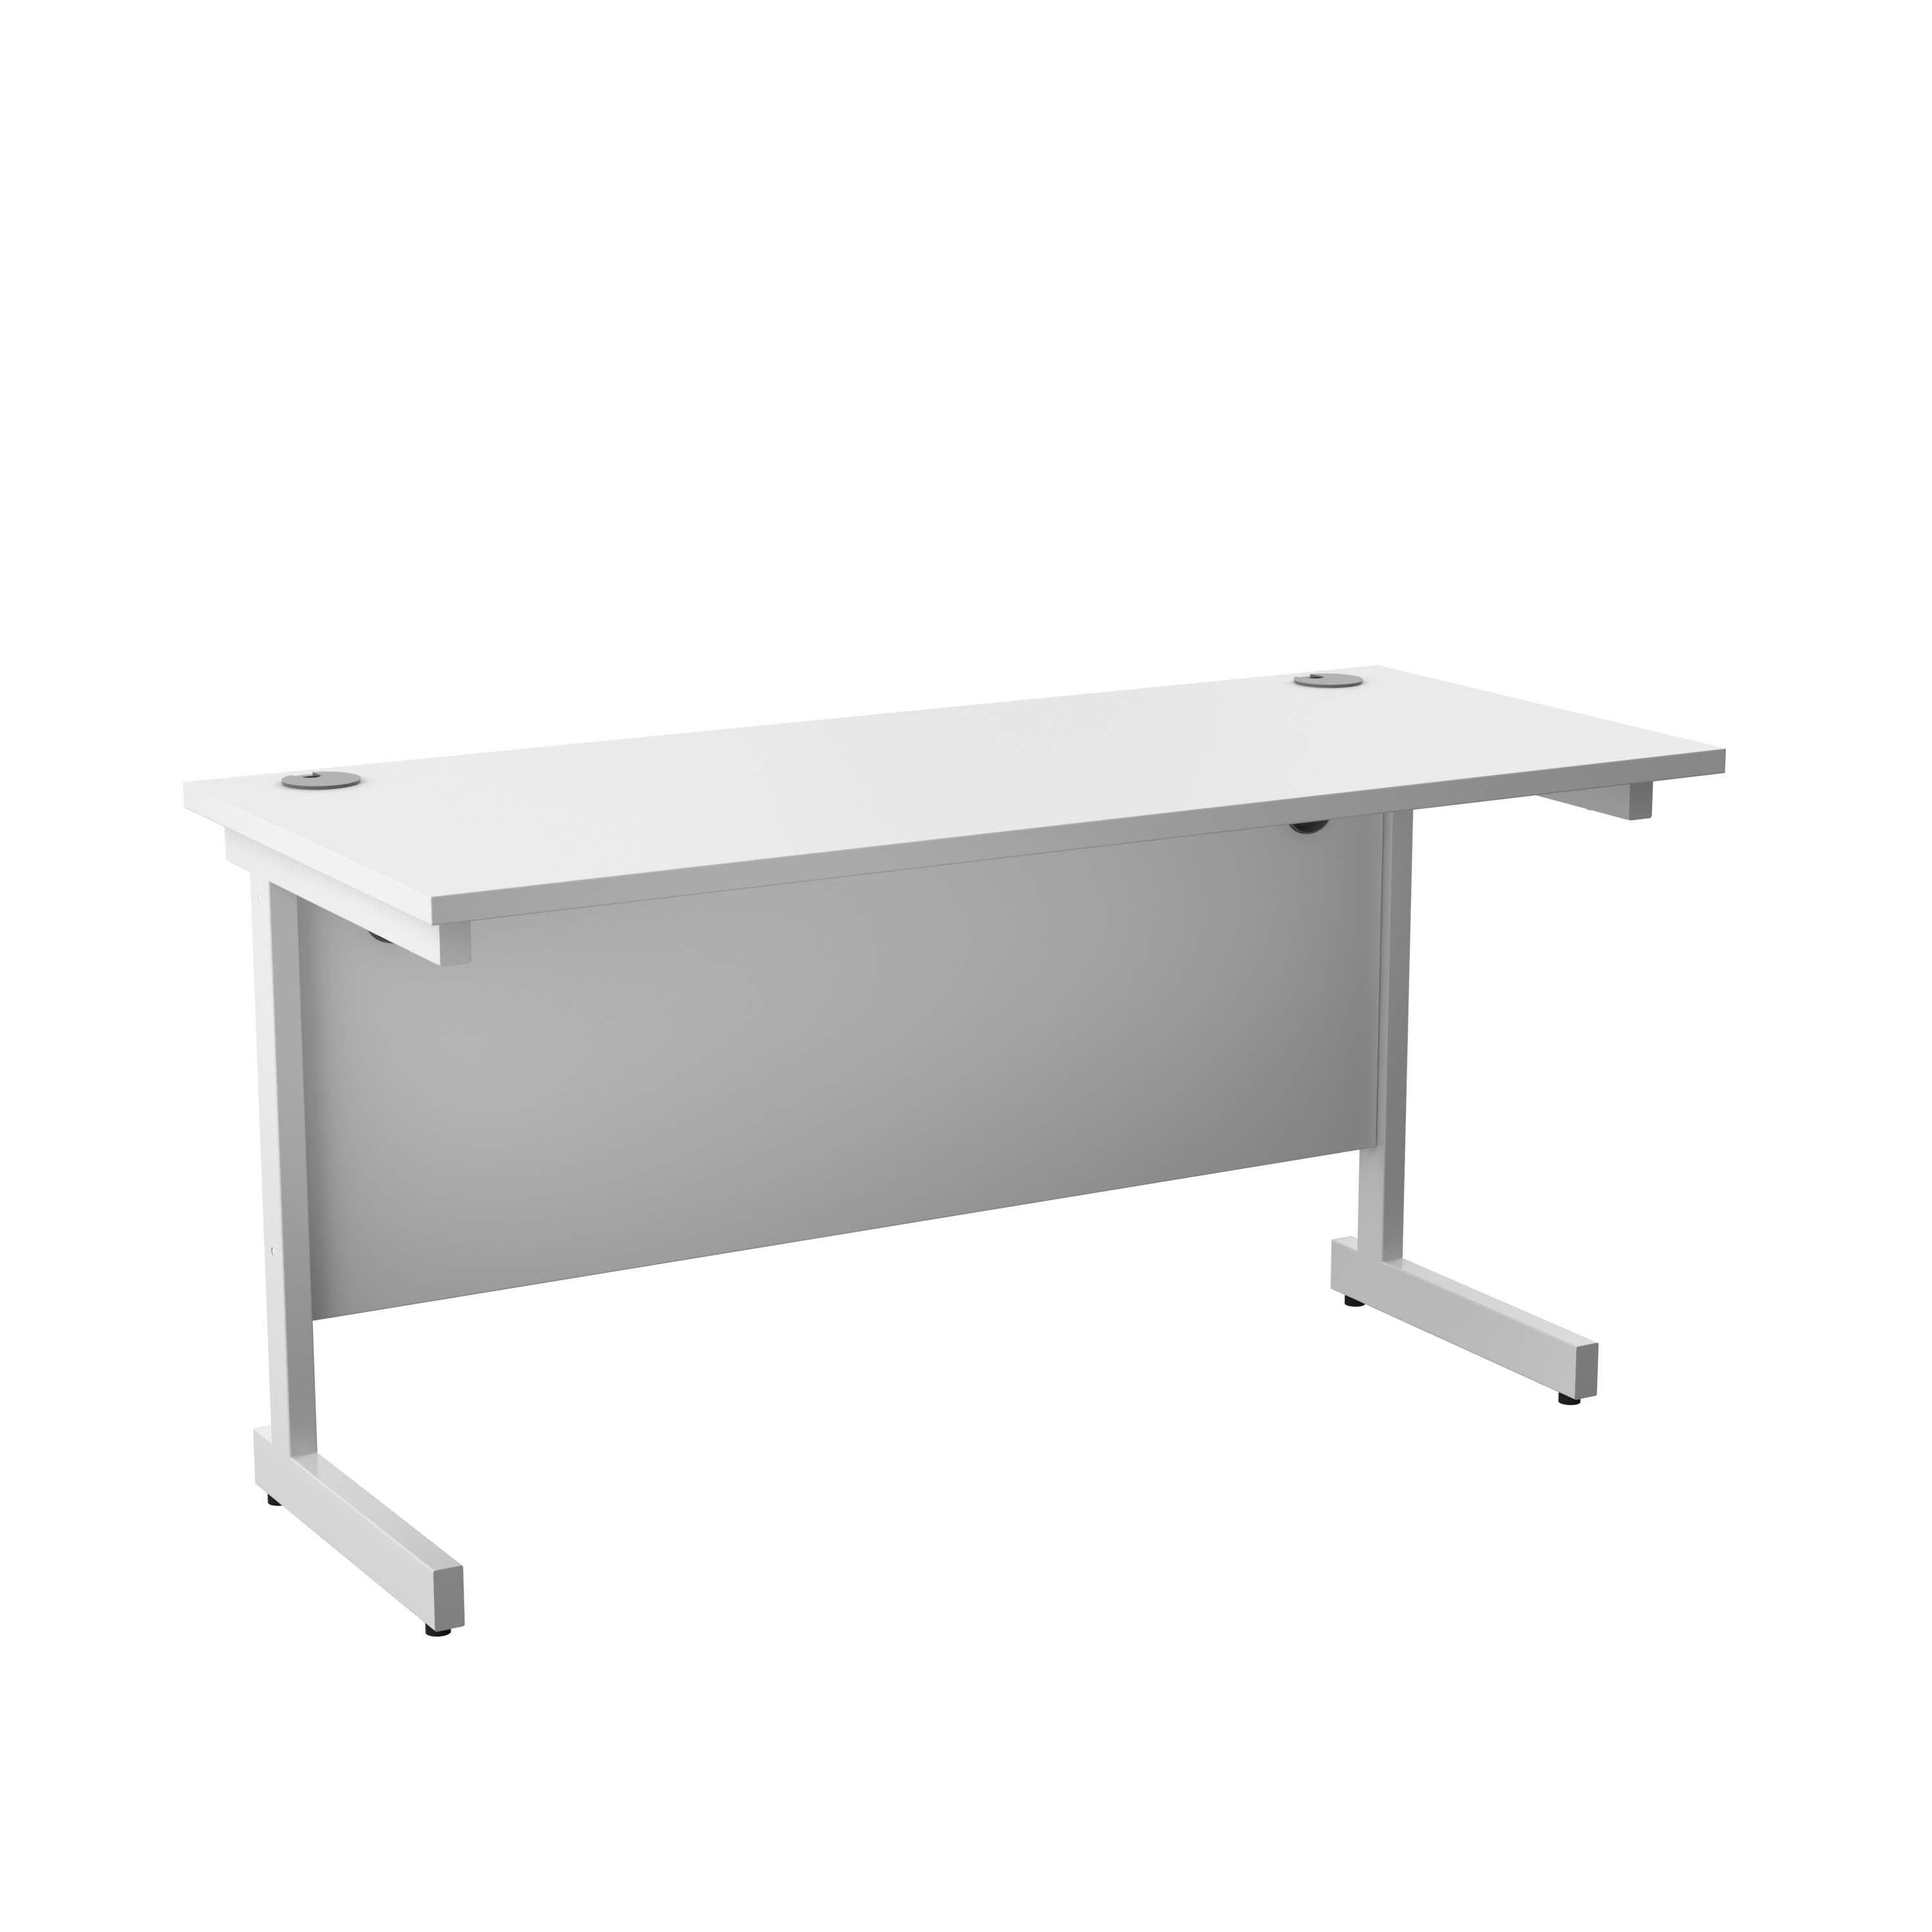 One Cantilever 1400 X 600 Rectangular White Cantilever Workstation - White